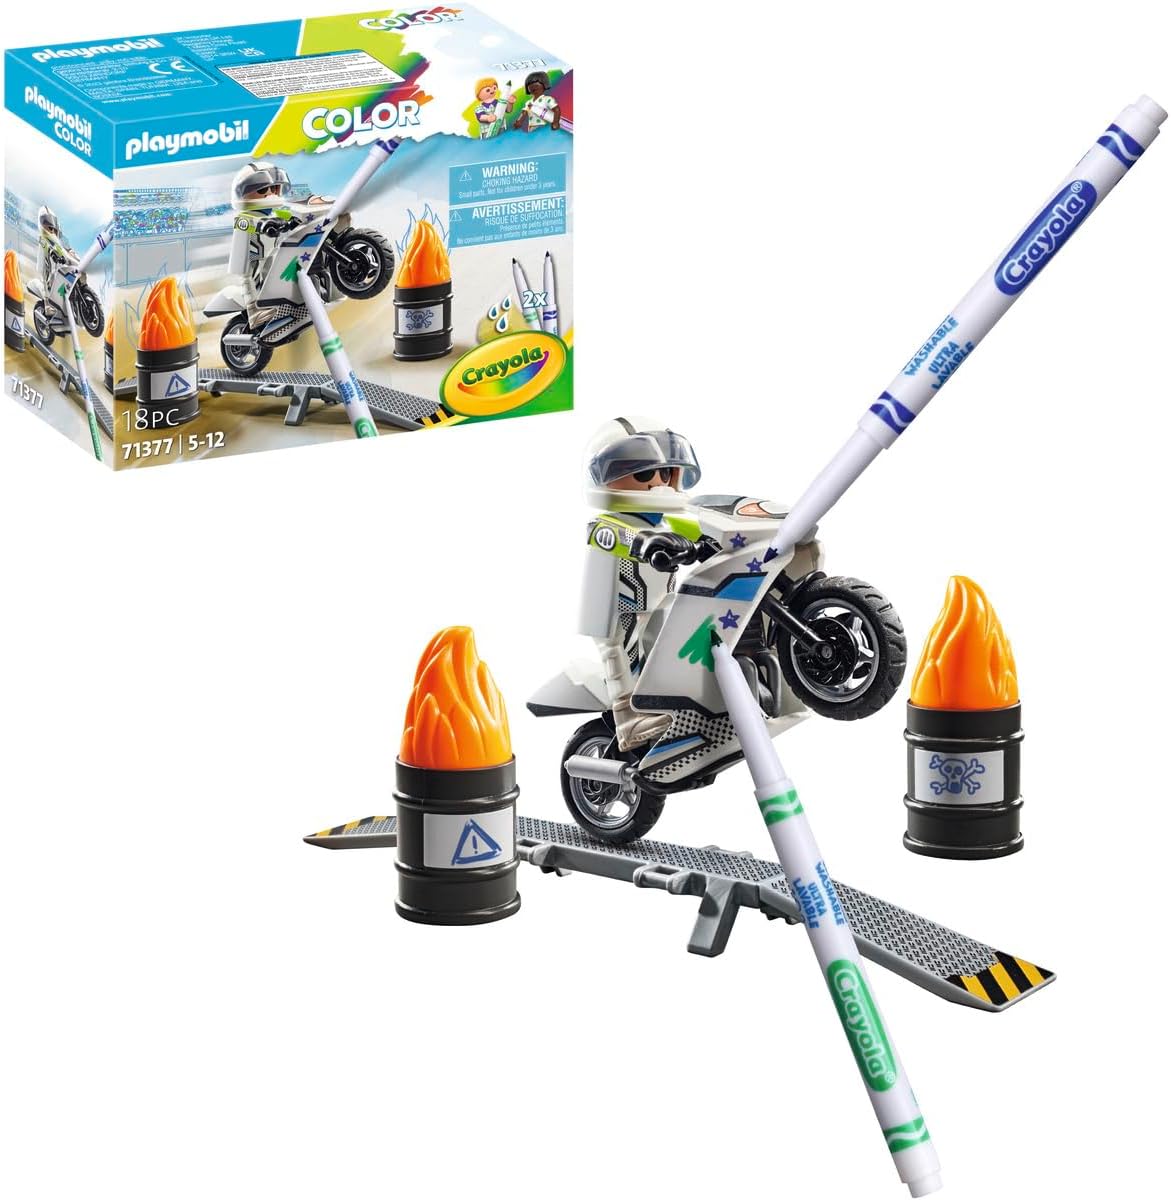 PLAYMOBIL Color 71377 Motorcycle Creative Vehicle Design with Water Soluble Pens, Sponge and Numerous Accessories for Action Packed Stunts Artistic Toy for Children Aged 5+